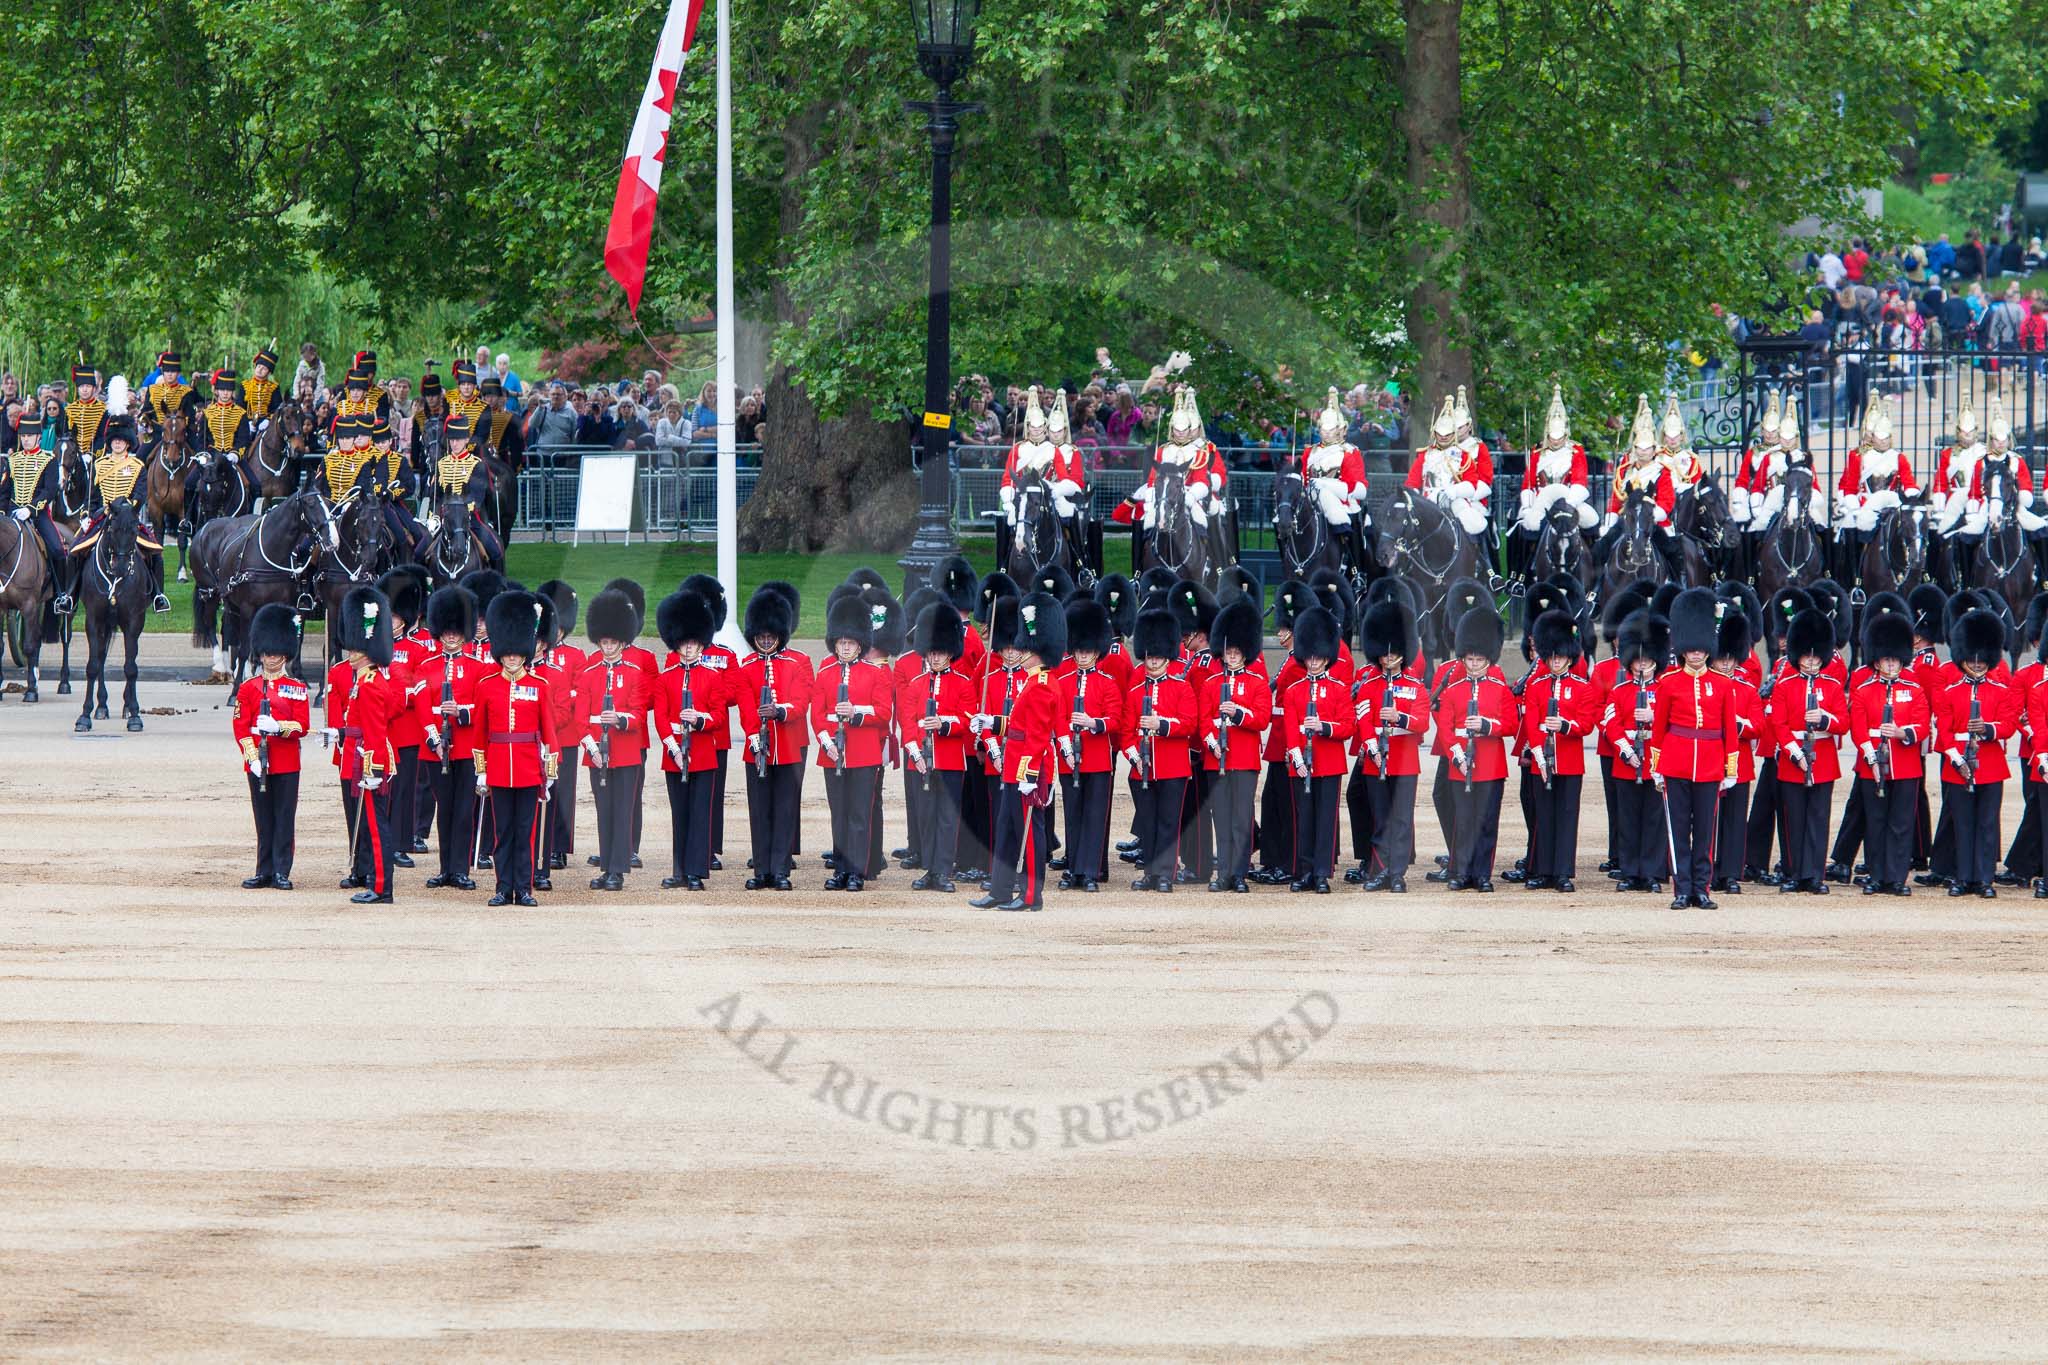 Major General's Review 2013: The Escort to the Colour has trooped the Colour past No. 2 Guard, 1st Battalion Welsh Guards, and is now almost back to their initial position, when they were the Escort for the Colour..
Horse Guards Parade, Westminster,
London SW1,

United Kingdom,
on 01 June 2013 at 11:25, image #435